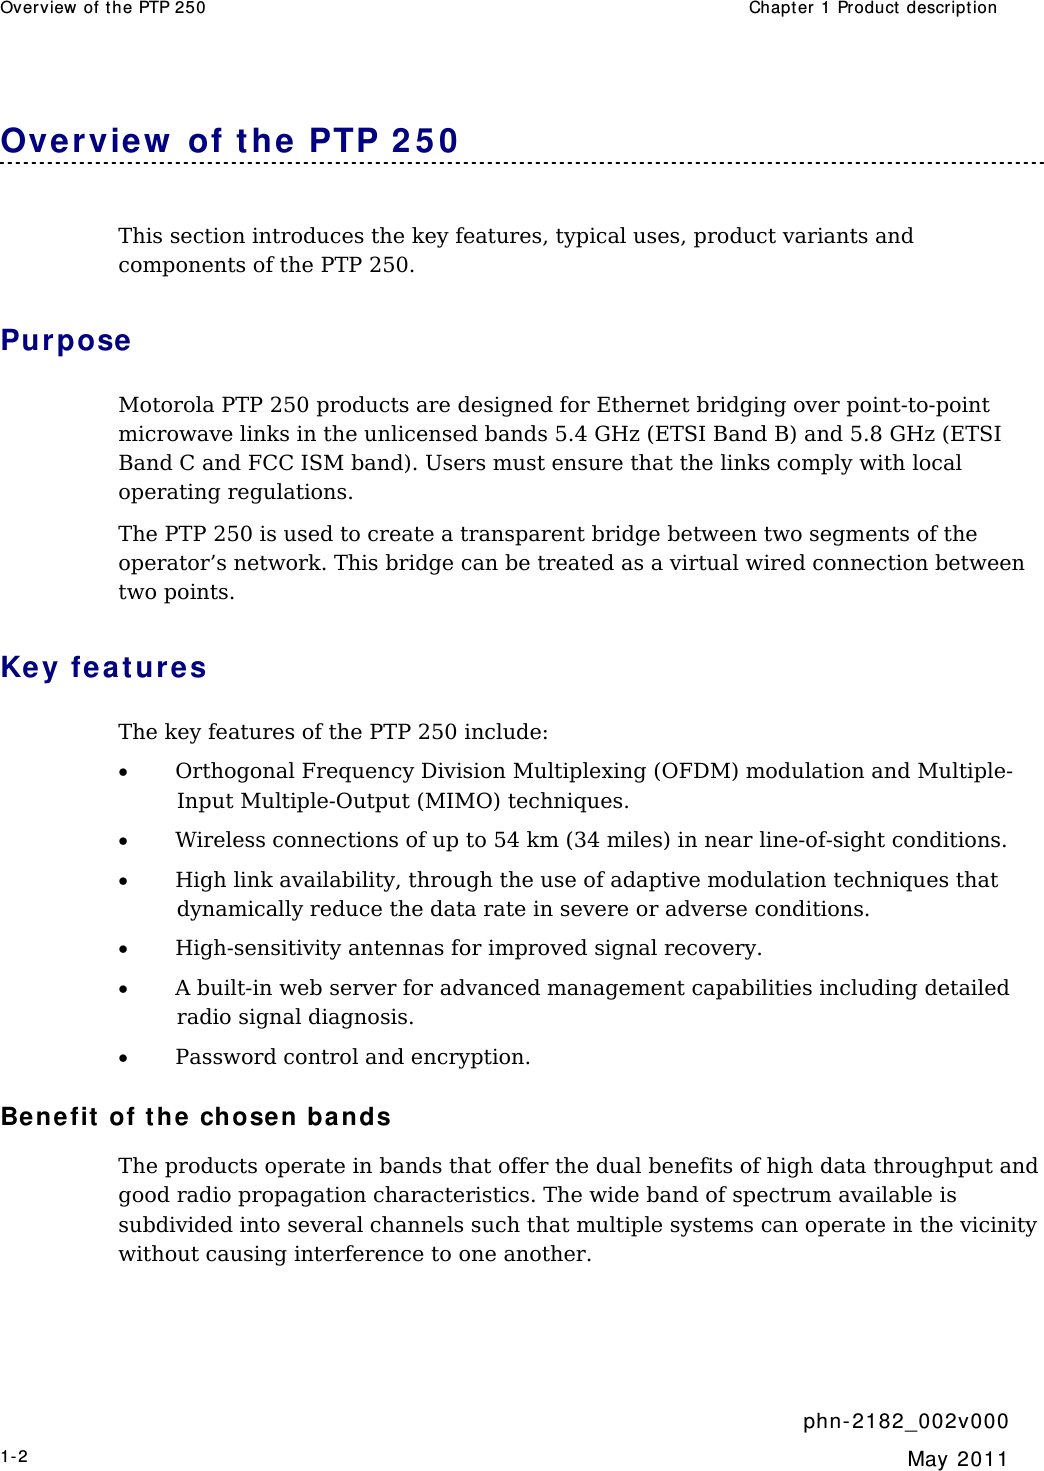 Overv iew  of the PTP 250  Chapt er  1 Product descr ipt ion     phn- 2 182_002v 000 1-2  May 2011  Ove rvie w  of t he PTP 2 5 0  This section introduces the key features, typical uses, product variants and components of the PTP 250. Purpose  Motorola PTP 250 products are designed for Ethernet bridging over point-to-point microwave links in the unlicensed bands 5.4 GHz (ETSI Band B) and 5.8 GHz (ETSI Band C and FCC ISM band). Users must ensure that the links comply with local operating regulations. The PTP 250 is used to create a transparent bridge between two segments of the operator’s network. This bridge can be treated as a virtual wired connection between two points. Key feat ur e s The key features of the PTP 250 include: • Orthogonal Frequency Division Multiplexing (OFDM) modulation and Multiple-Input Multiple-Output (MIMO) techniques. • Wireless connections of up to 54 km (34 miles) in near line-of-sight conditions. • High link availability, through the use of adaptive modulation techniques that dynamically reduce the data rate in severe or adverse conditions. • High-sensitivity antennas for improved signal recovery. • A built-in web server for advanced management capabilities including detailed radio signal diagnosis. • Password control and encryption. Be nefit  of t he chosen bands The products operate in bands that offer the dual benefits of high data throughput and good radio propagation characteristics. The wide band of spectrum available is subdivided into several channels such that multiple systems can operate in the vicinity without causing interference to one another. 